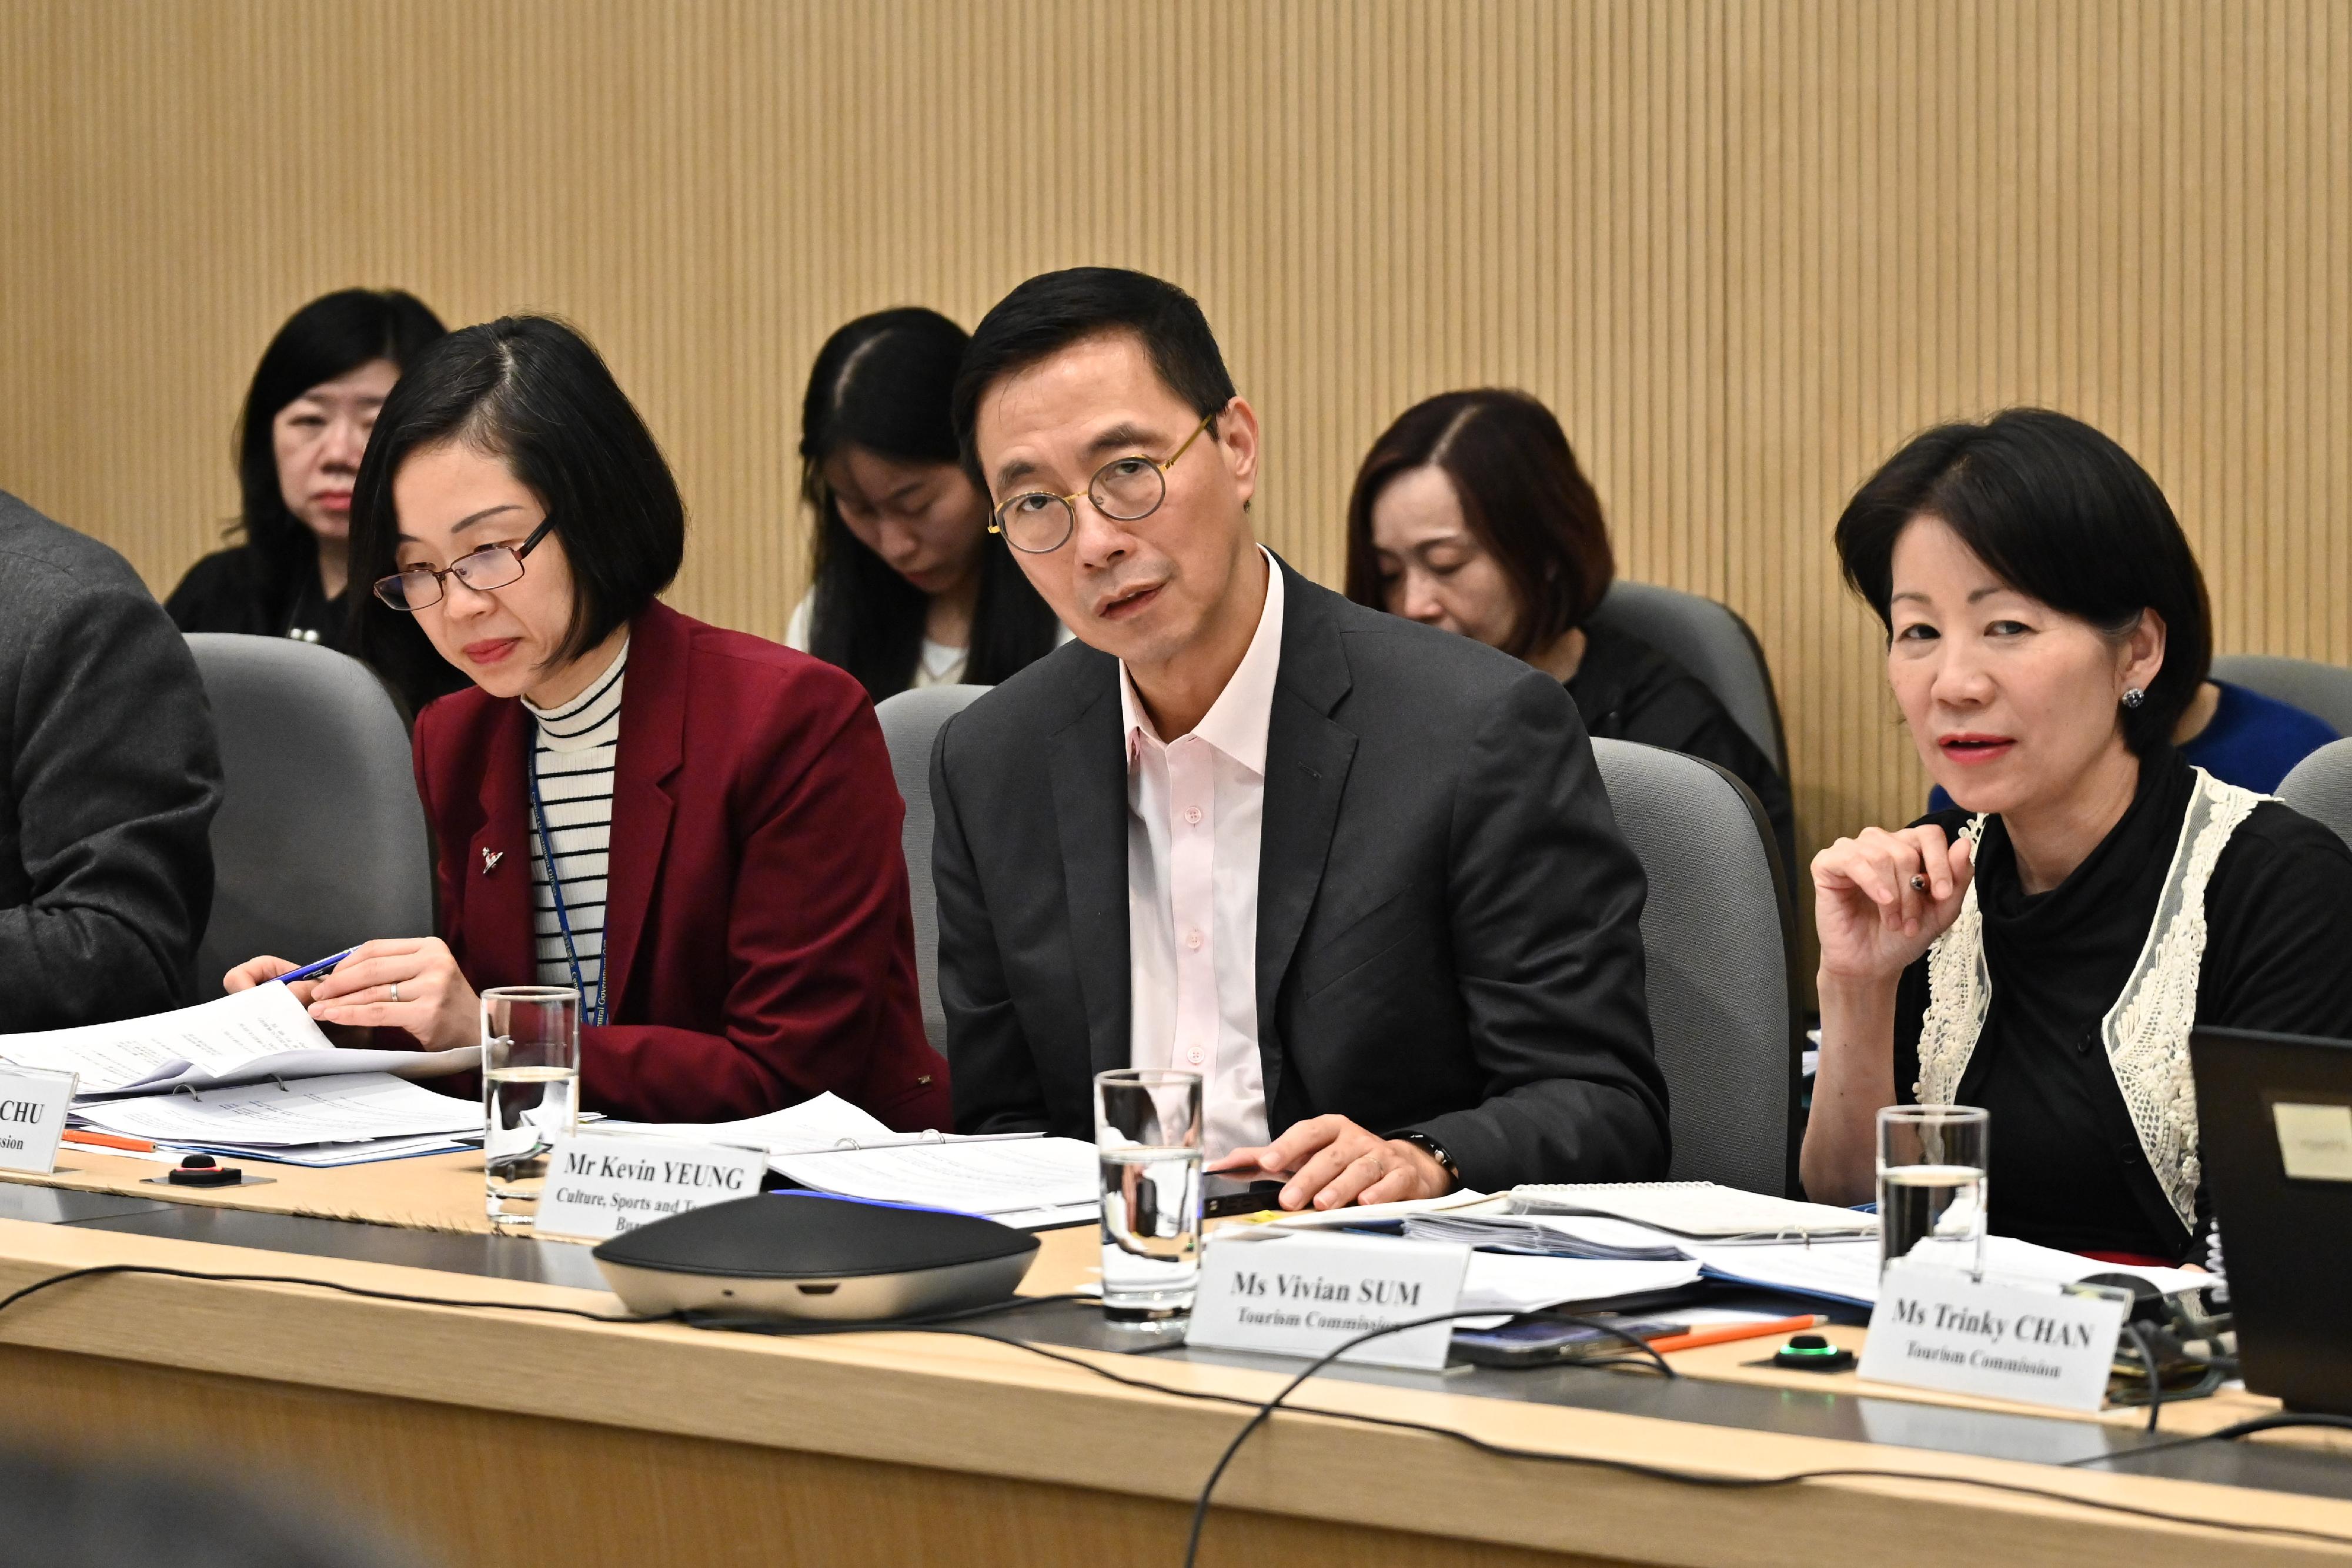 The Secretary for Culture, Sports and Tourism, Mr Kevin Yeung (centre), chairs a meeting today (February 1) to co-ordinate preparation for visitor arrivals to Hong Kong during Chinese New Year Golden Week of the Mainland, and is briefed by representatives of various participating units on their relevant preparation work.